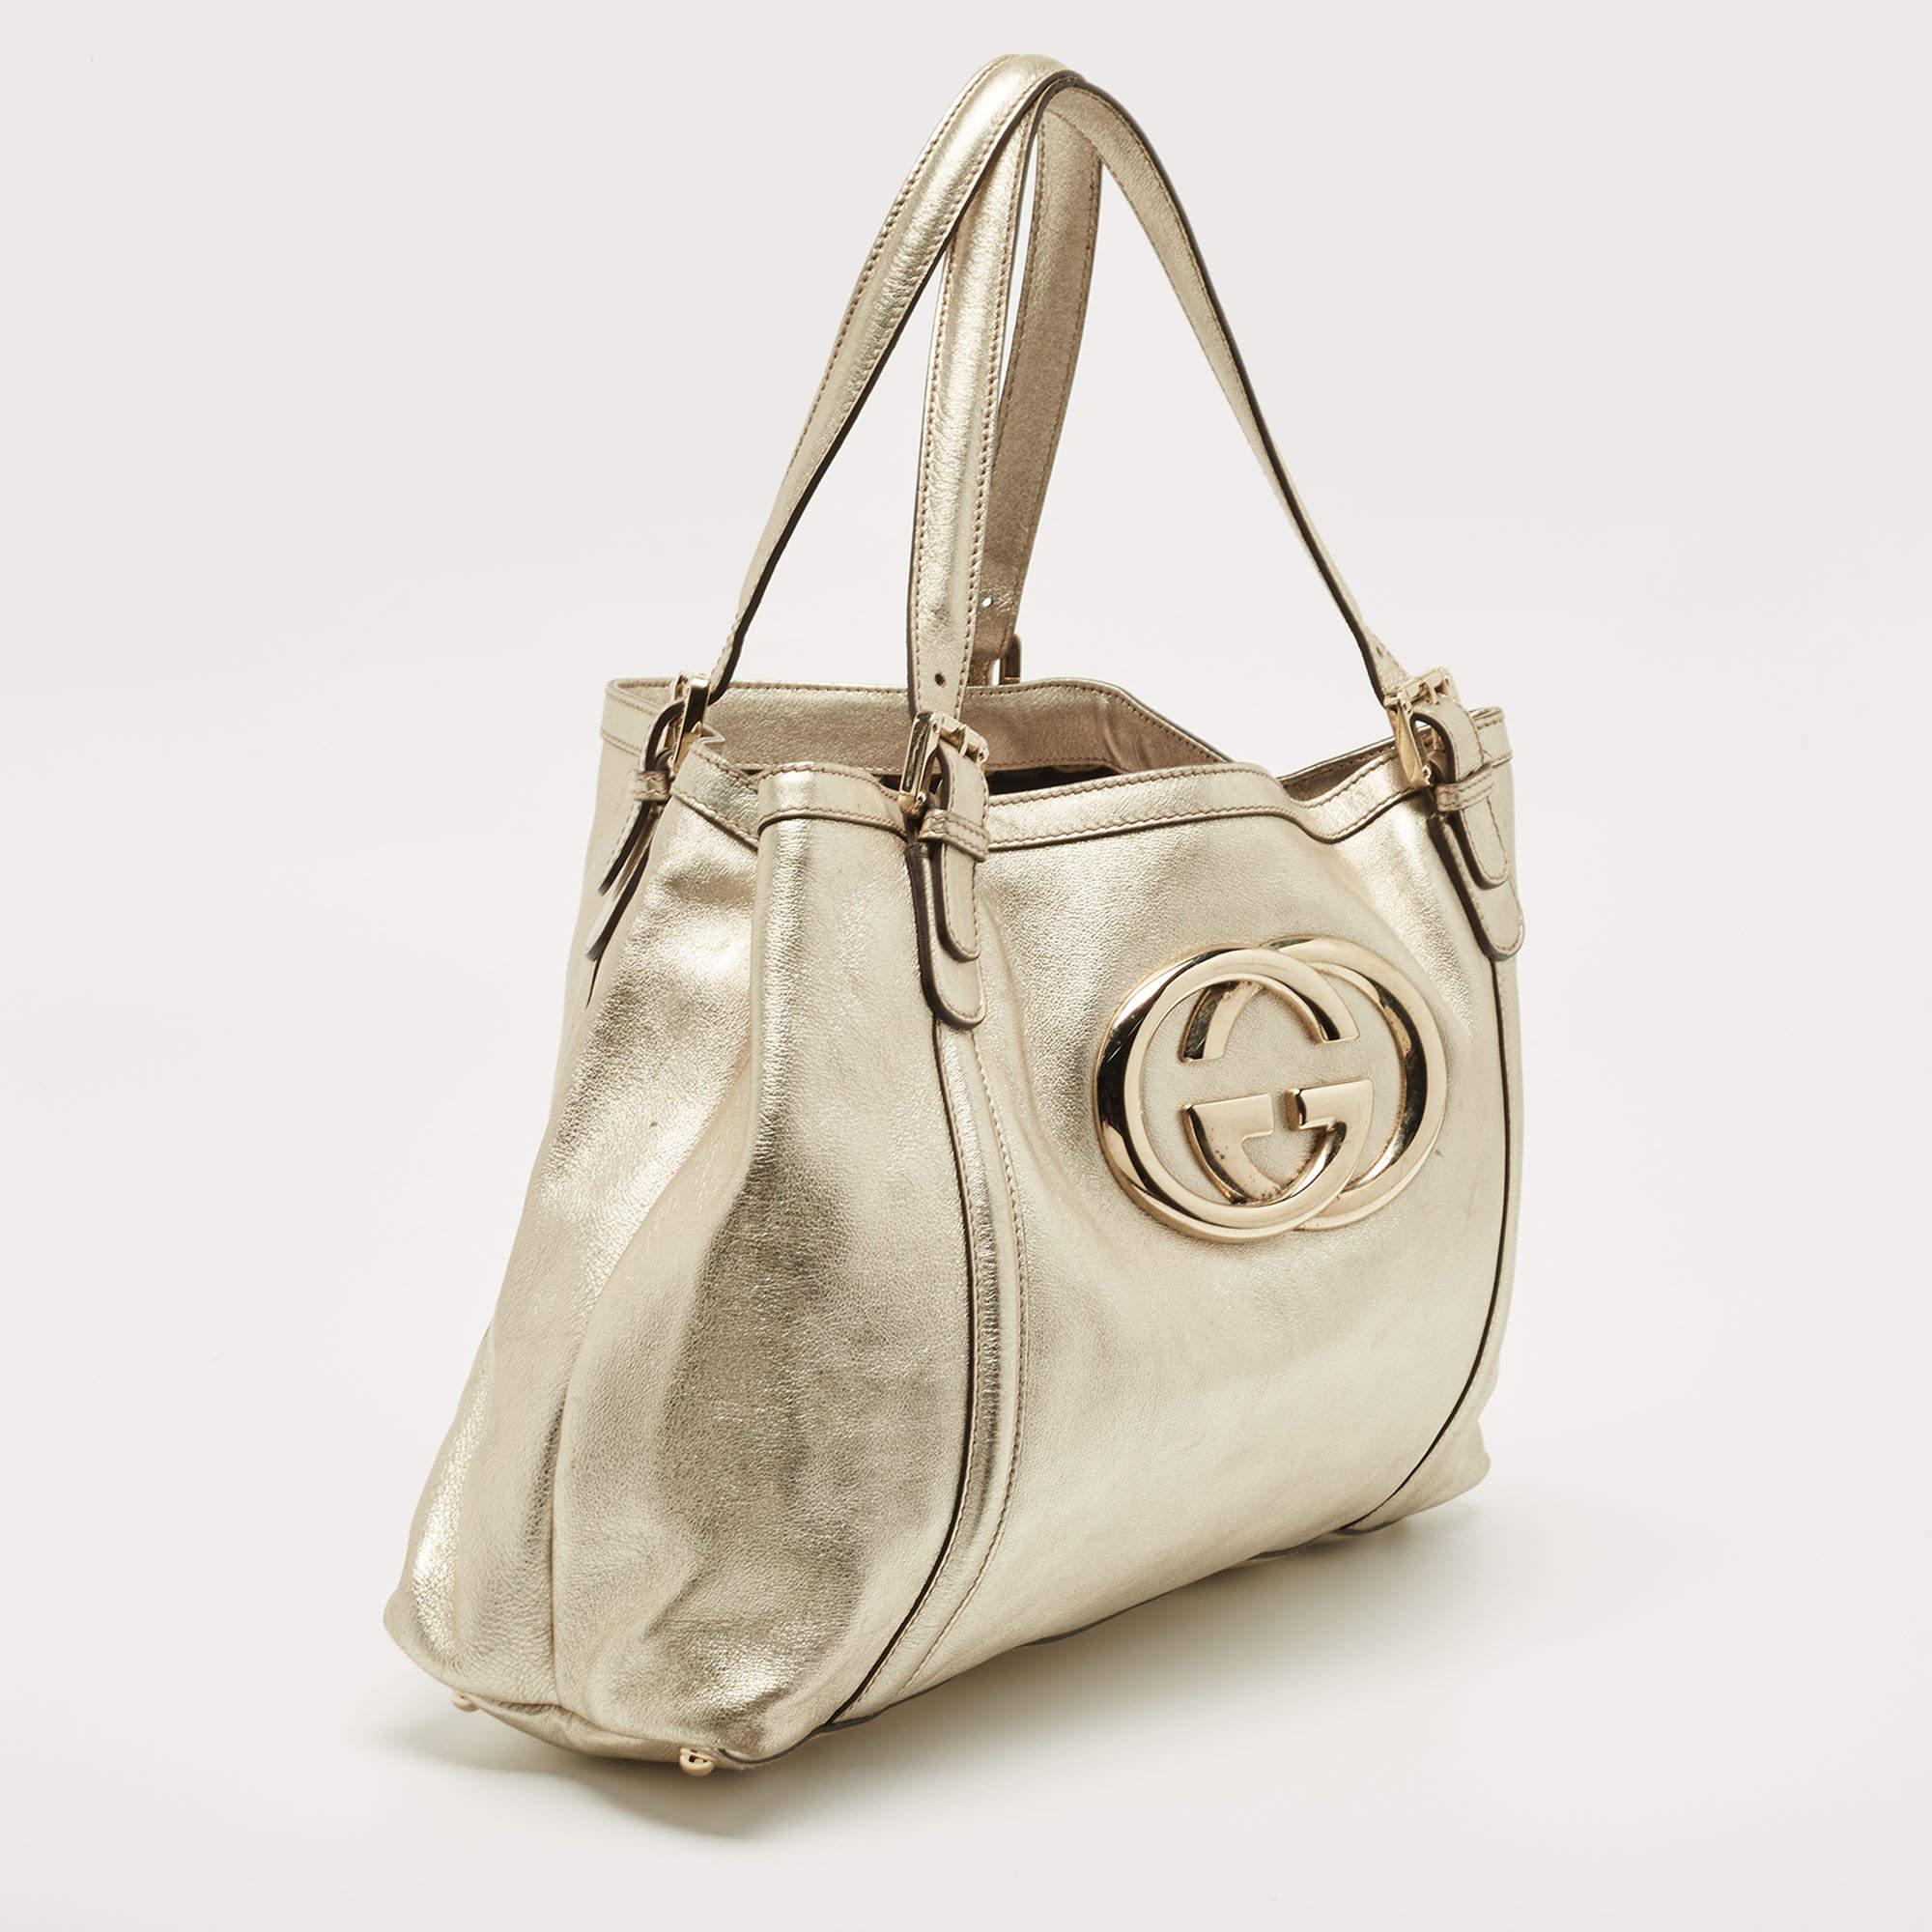 This designer tote from the House of Gucci is super classy and functional, perfect for everyday use. It is made from gold leather on the exterior with a GG logo adorning the front.

